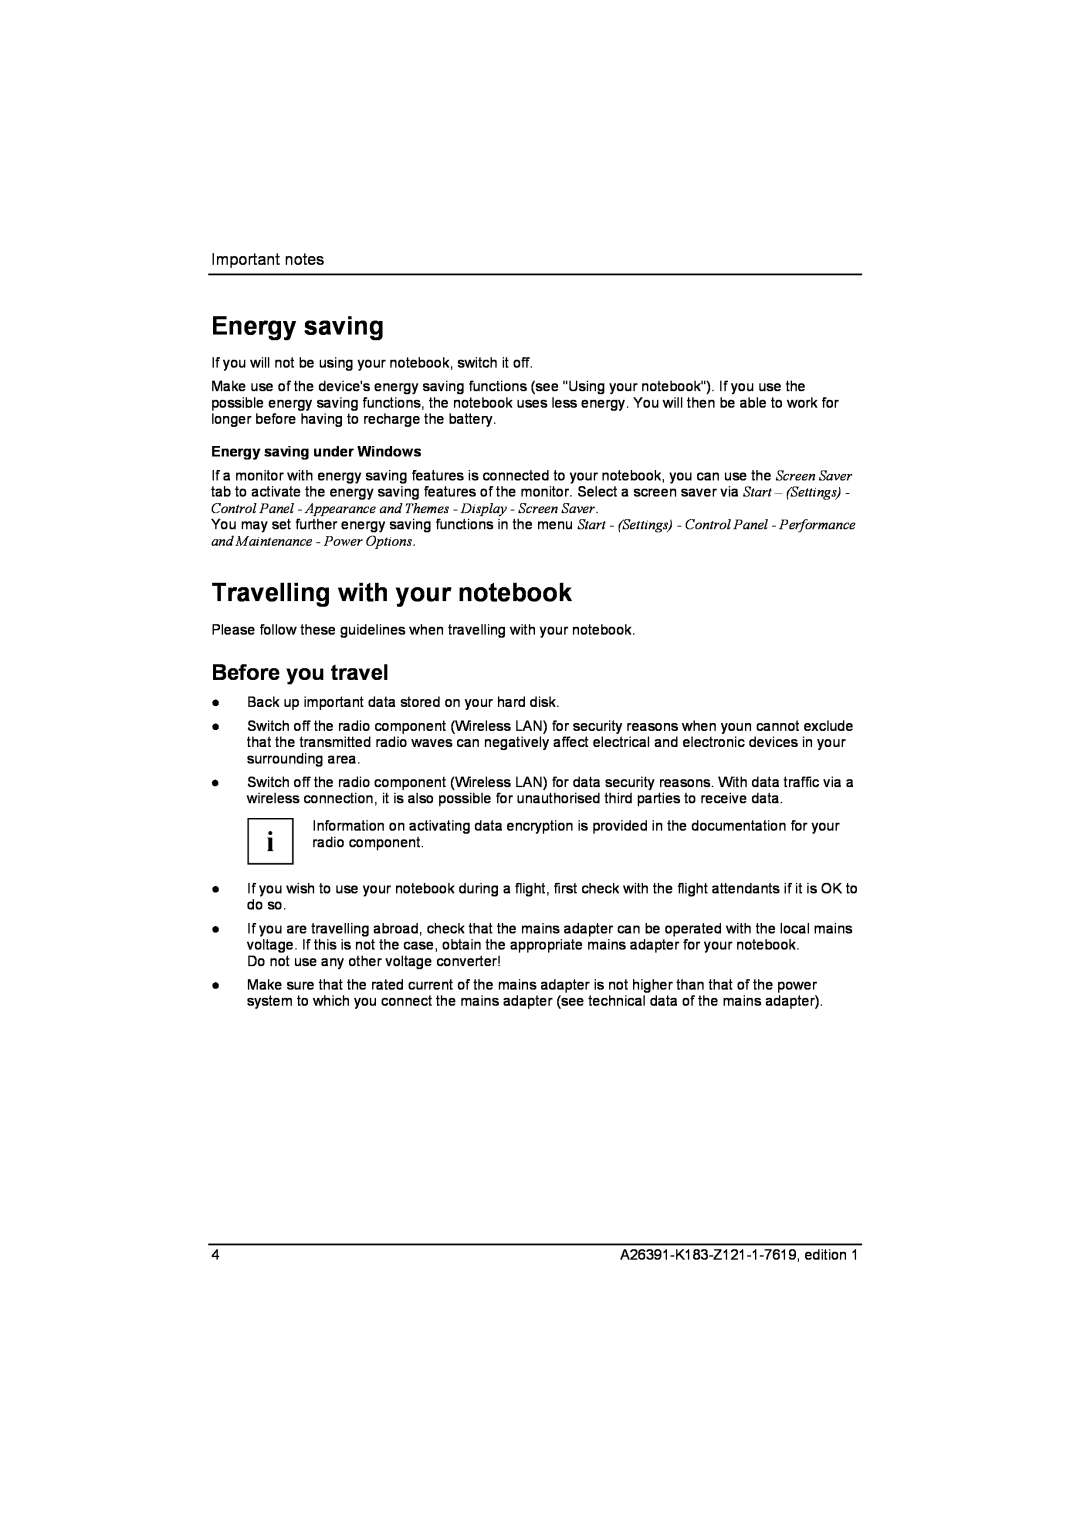 Fujitsu Siemens Computers V2035 manual Energy saving, Travelling with your notebook, Before you travel, Important notes 